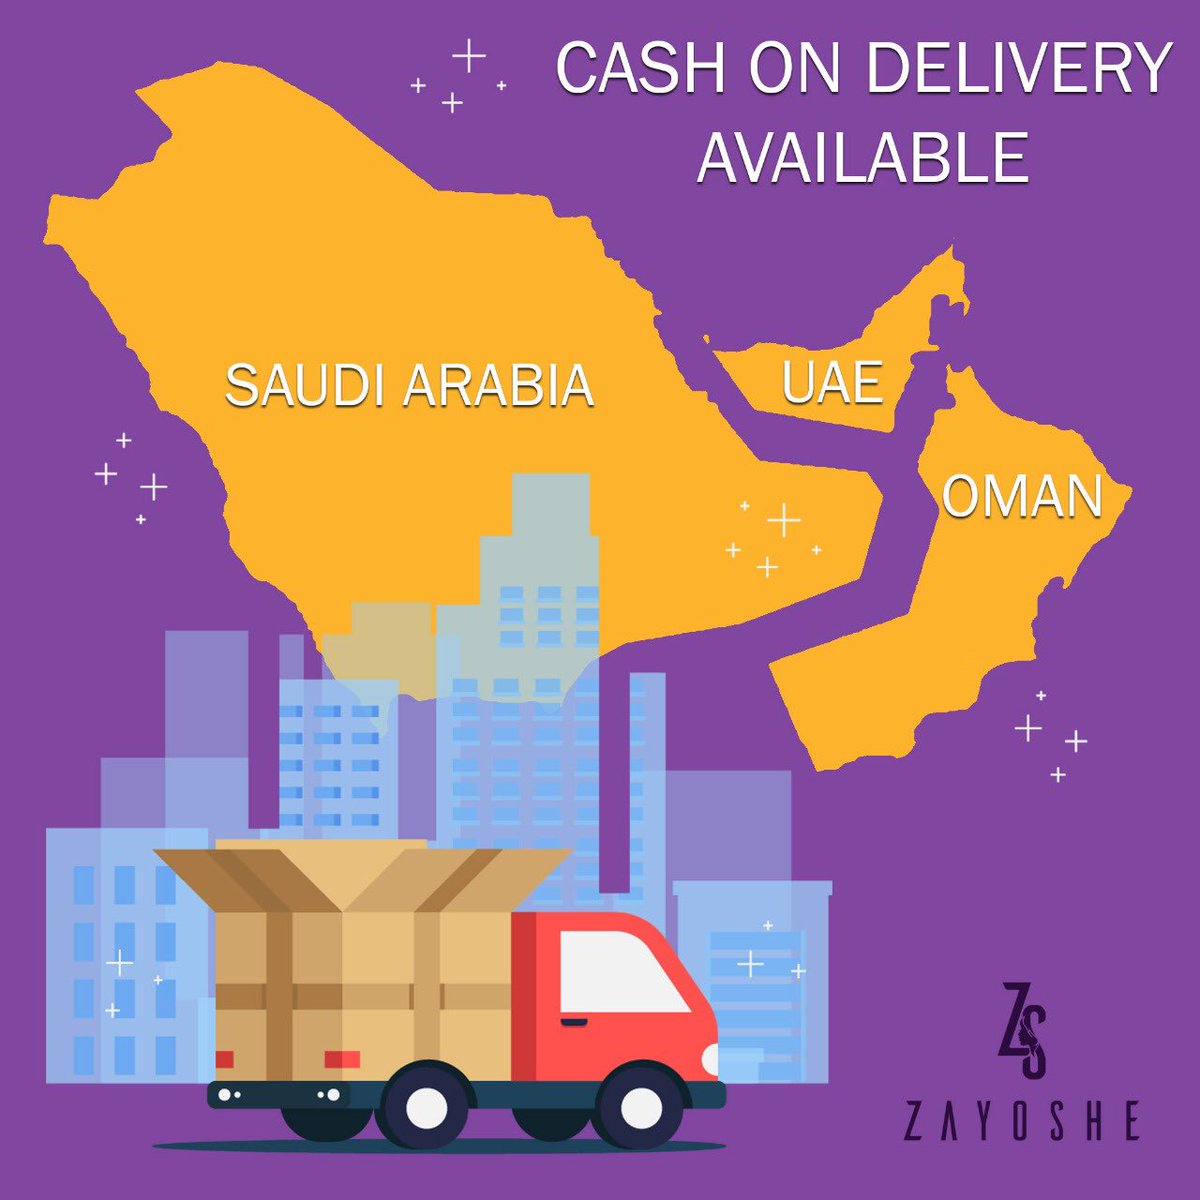 Cash on delivery available in UAE, Oman and Saudi Arabia! 
Free shipping on orders abound 250.00 AED (UAE only).
.
#cod #cashondelivery #saudifashion #uaefashion #modestfashion #dubaimall #saudifashion #abudhabifashion #shopping #discount #freeshipping #dhahran #modestwear